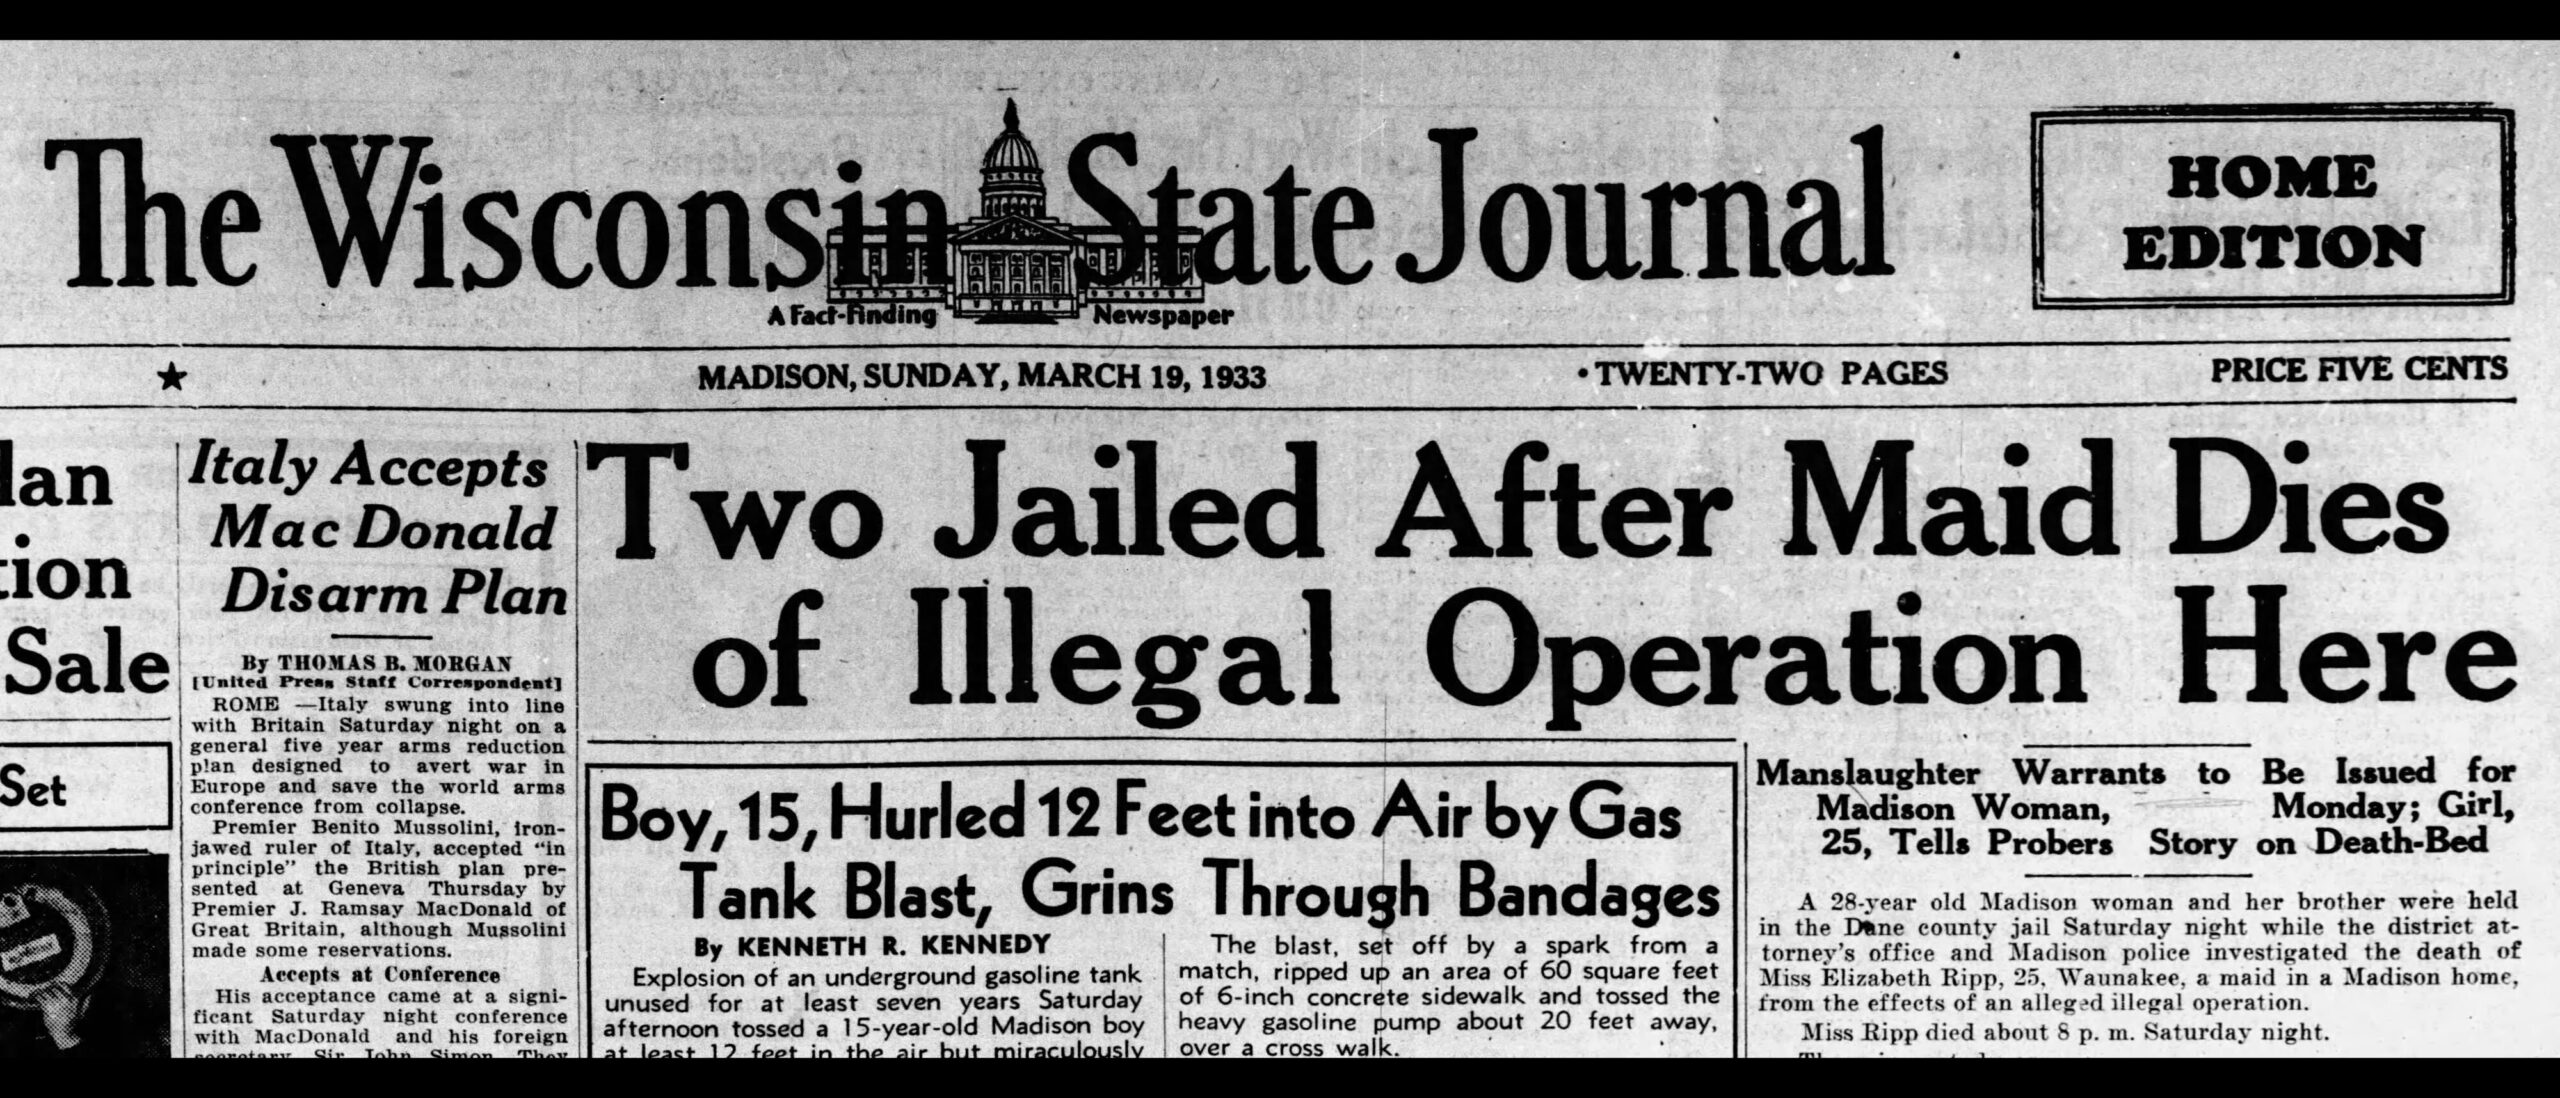 A newspaper clipping from the Wisconsin State Journal shows a headline reading, "Two Jailed After Maid Dies of Illegal Operation Here"